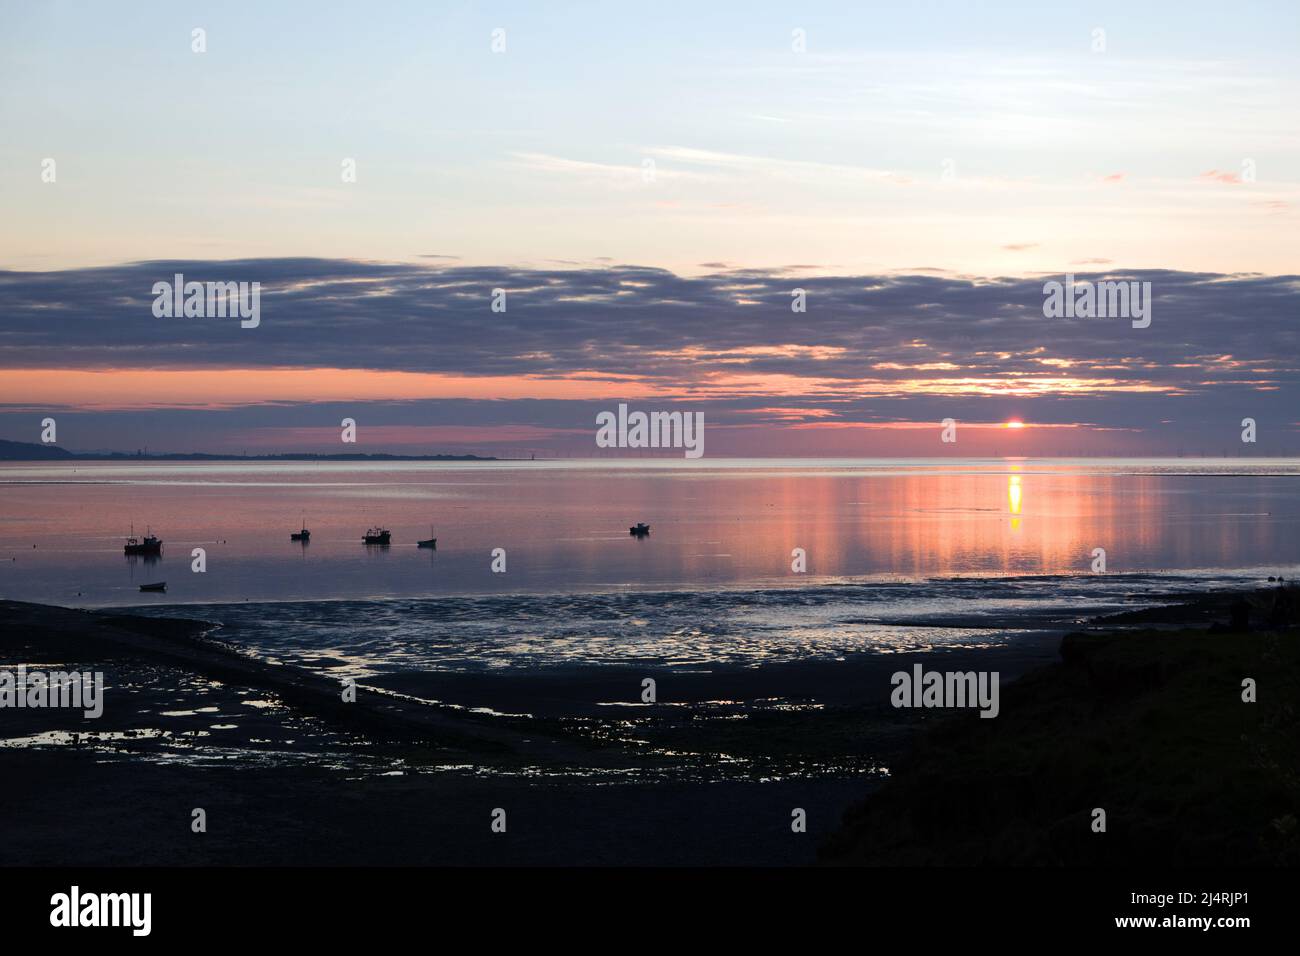 The Dee Estuary here seen at sunset forms a boundary between the Wirral Peninsula in north-west England and Flintshire in north-east Wales. Stock Photo